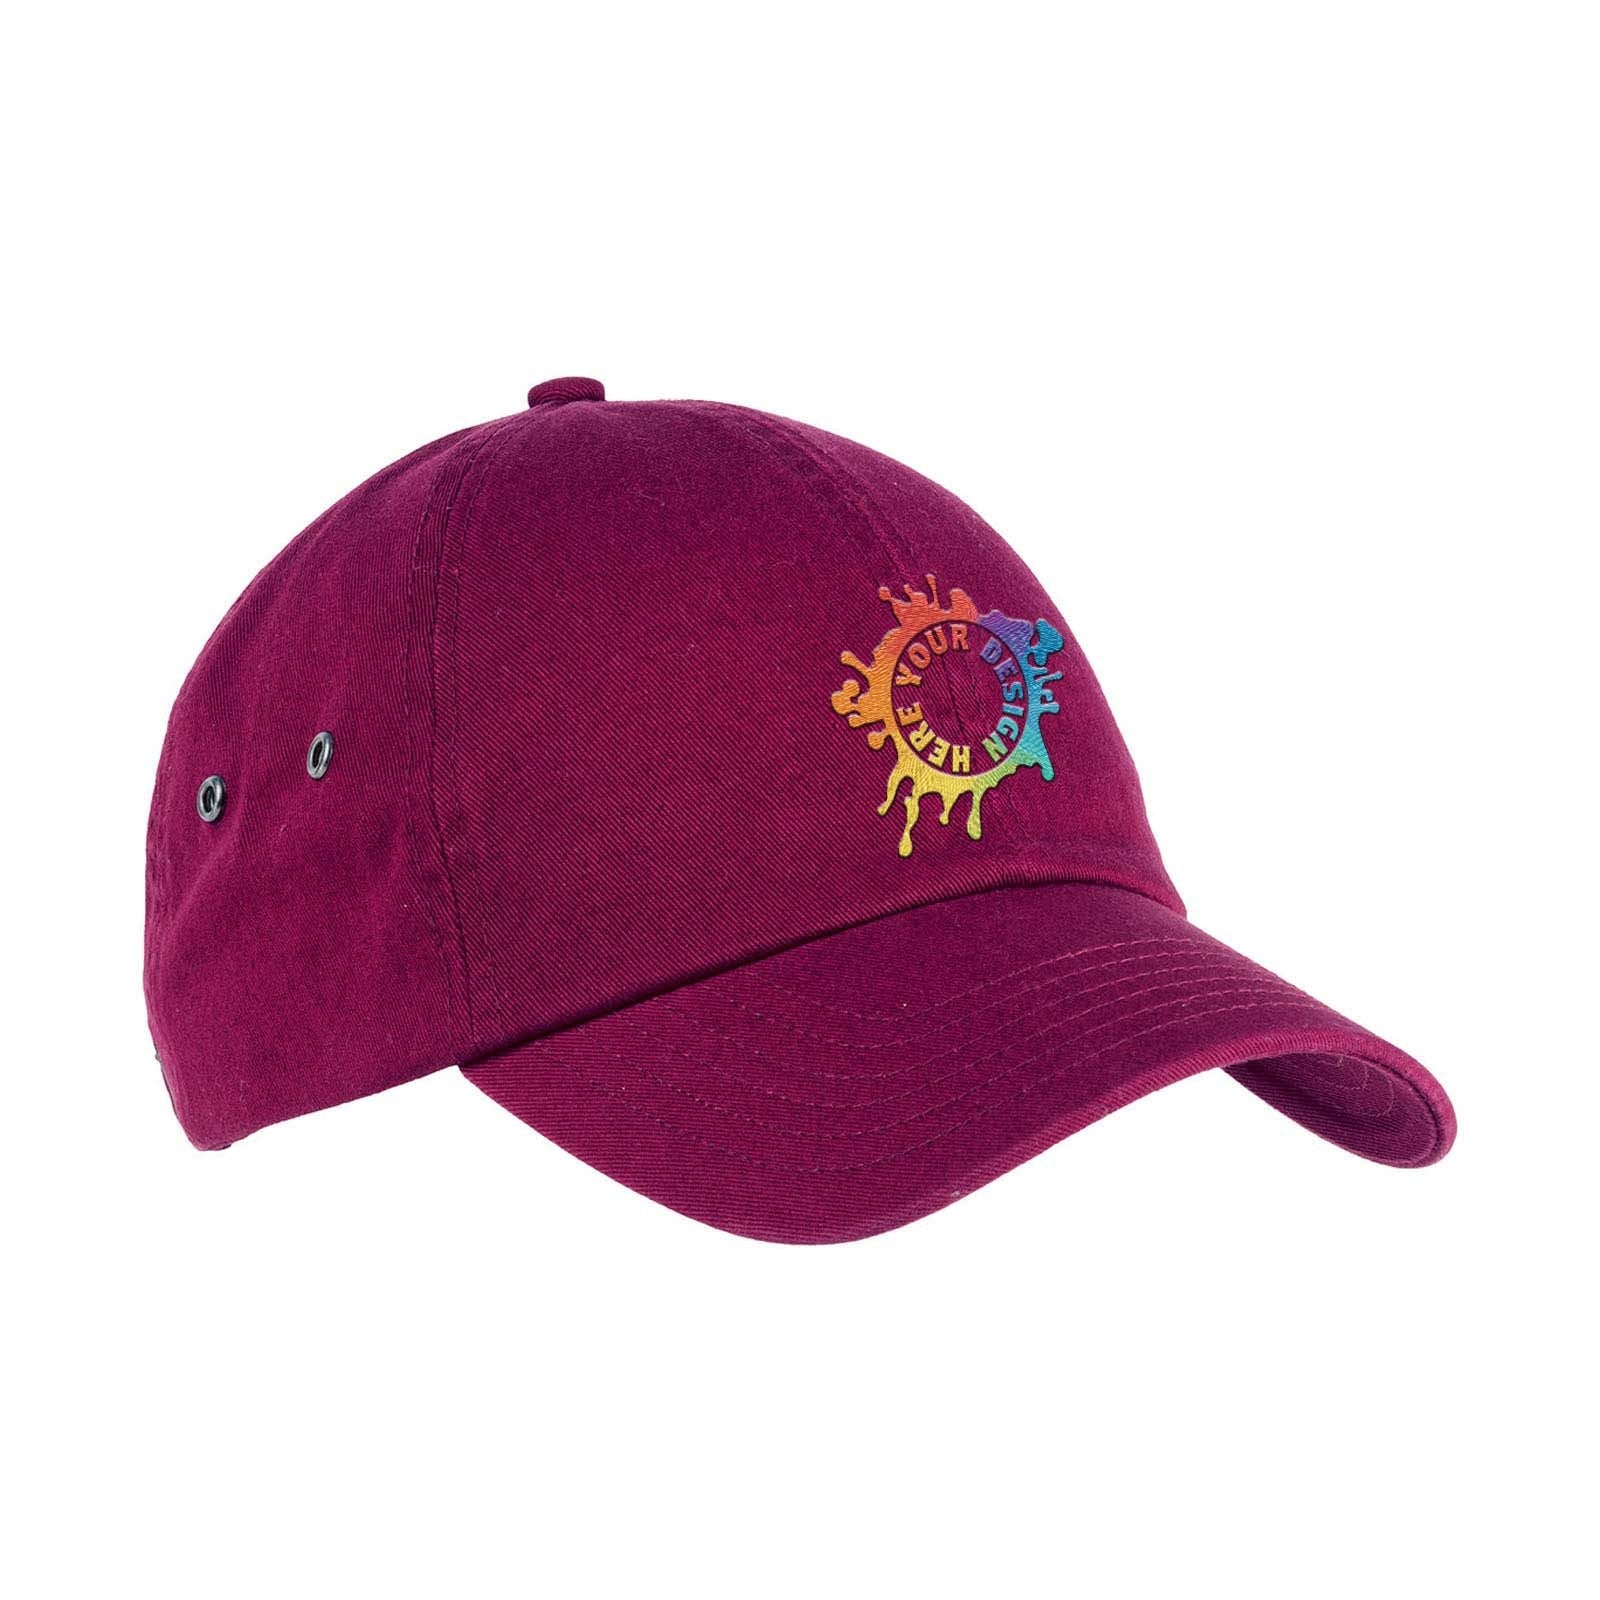 Embroidered Big Accessories Washed Baseball Cap - Mato & Hash